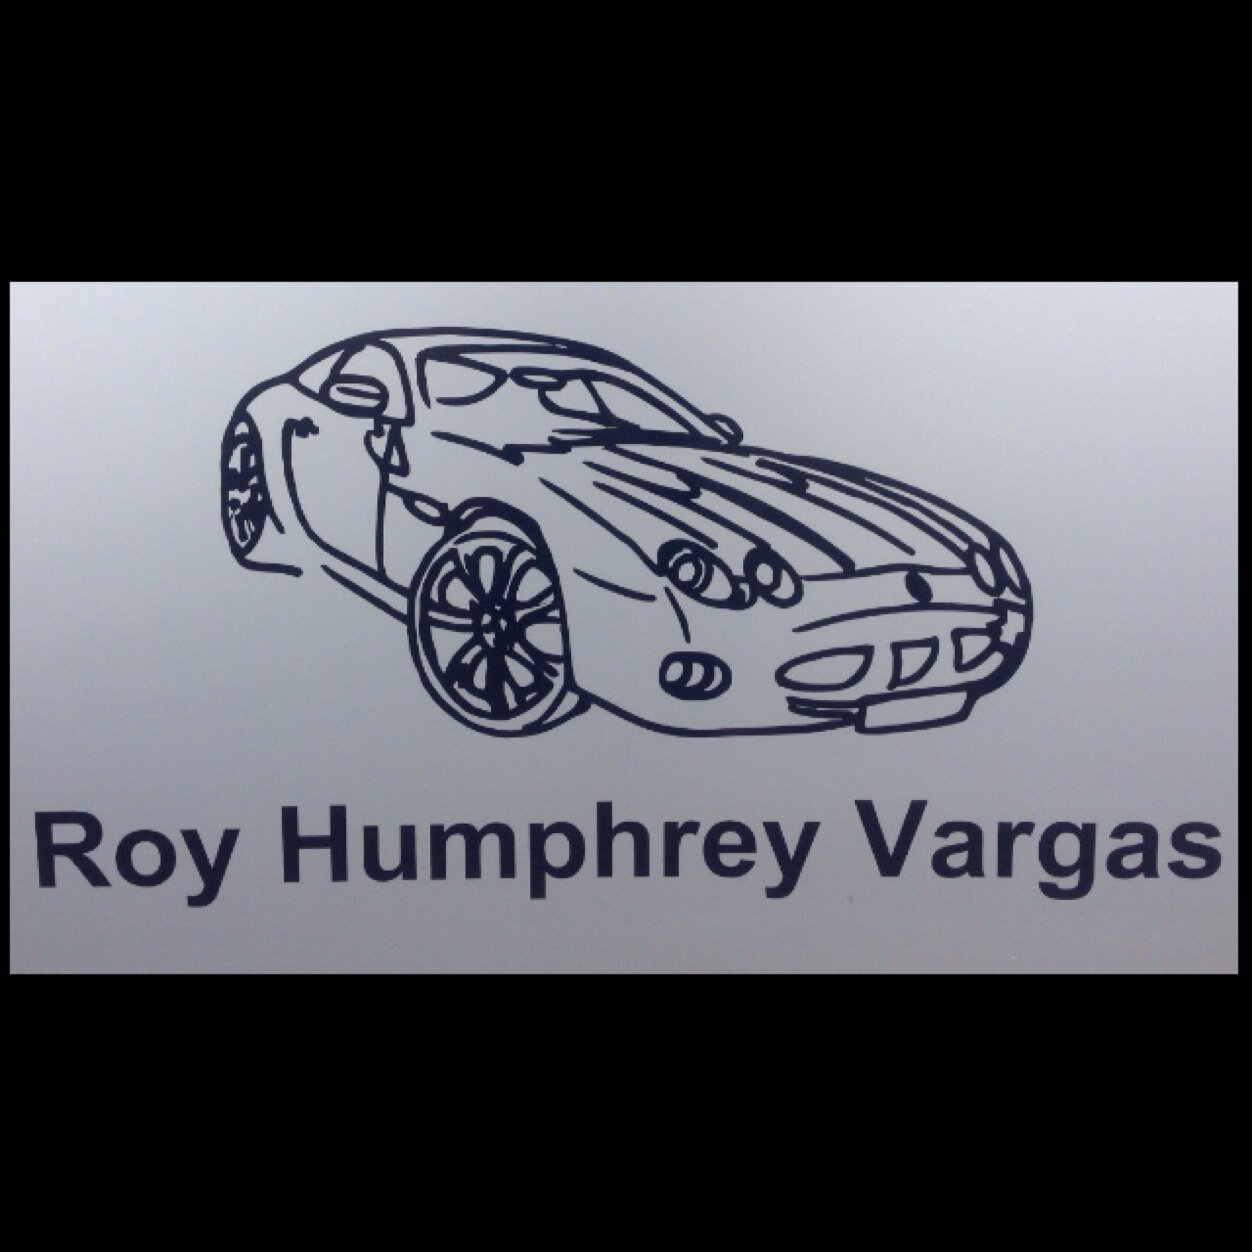 Roy Humphrey Vargas - 50 years of Motoring Heritage - suppliers of new and pre-owned prestige, 4x4, sports and luxury motor vehicles. 01379 872111 anytime